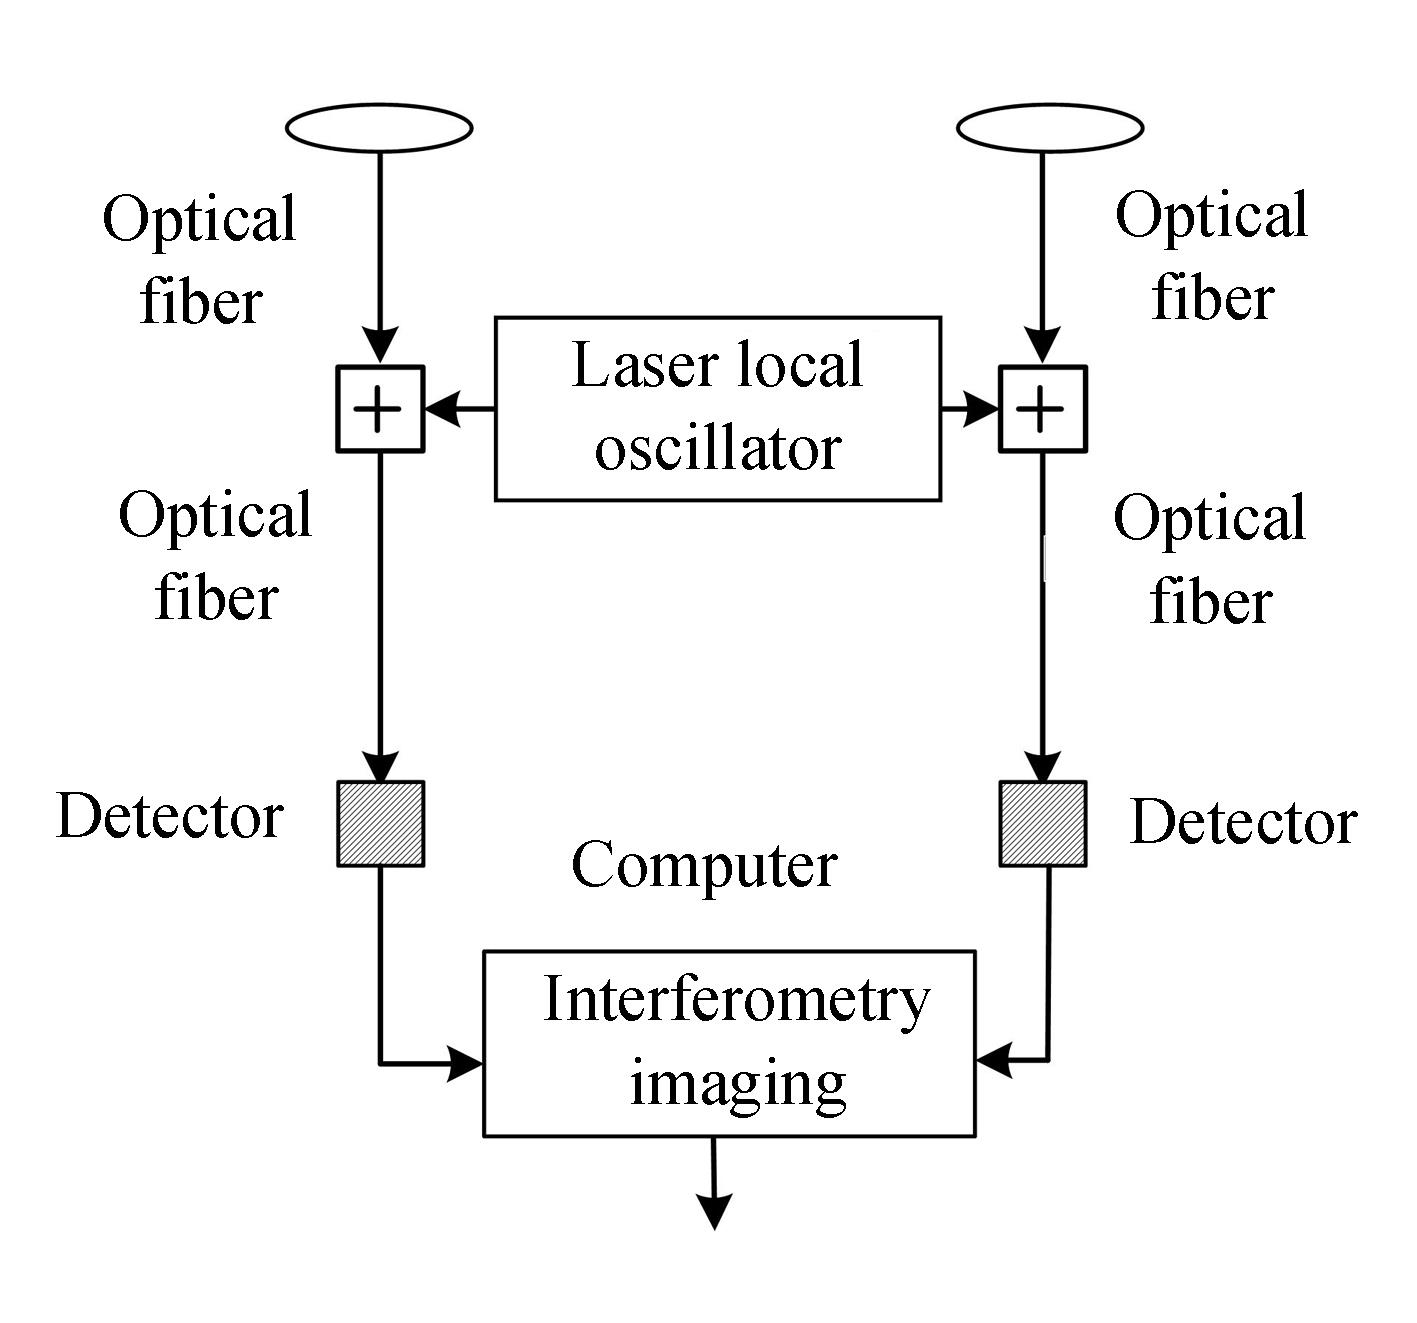 Laser local oscillator and infrared coherent detection interferometry imaging structure